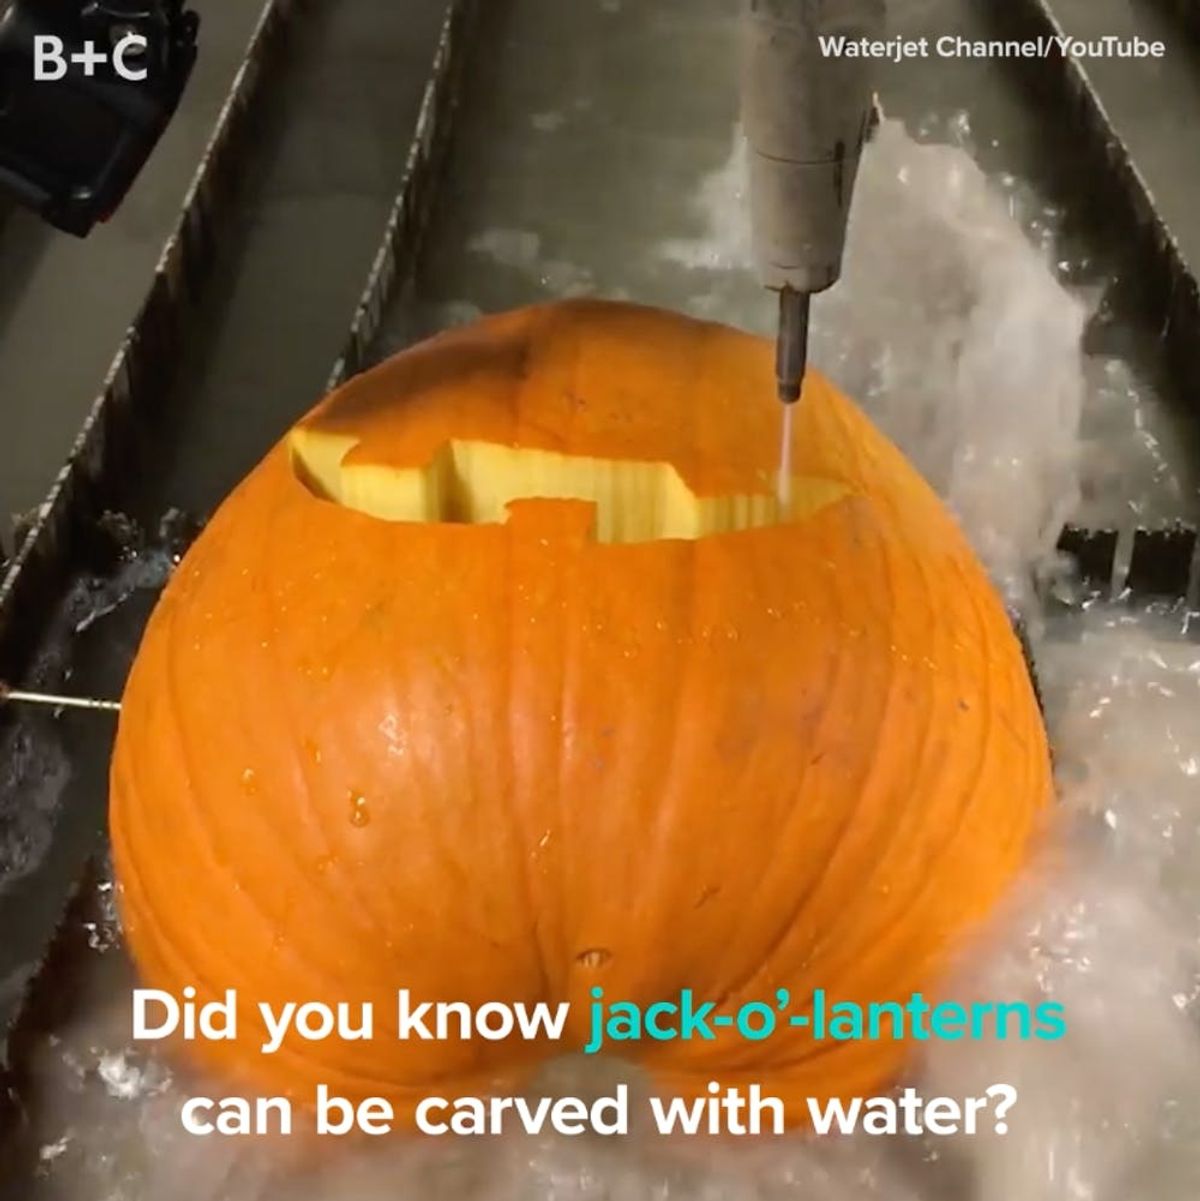 WTF! Pumpkins Can Be Carved With Water